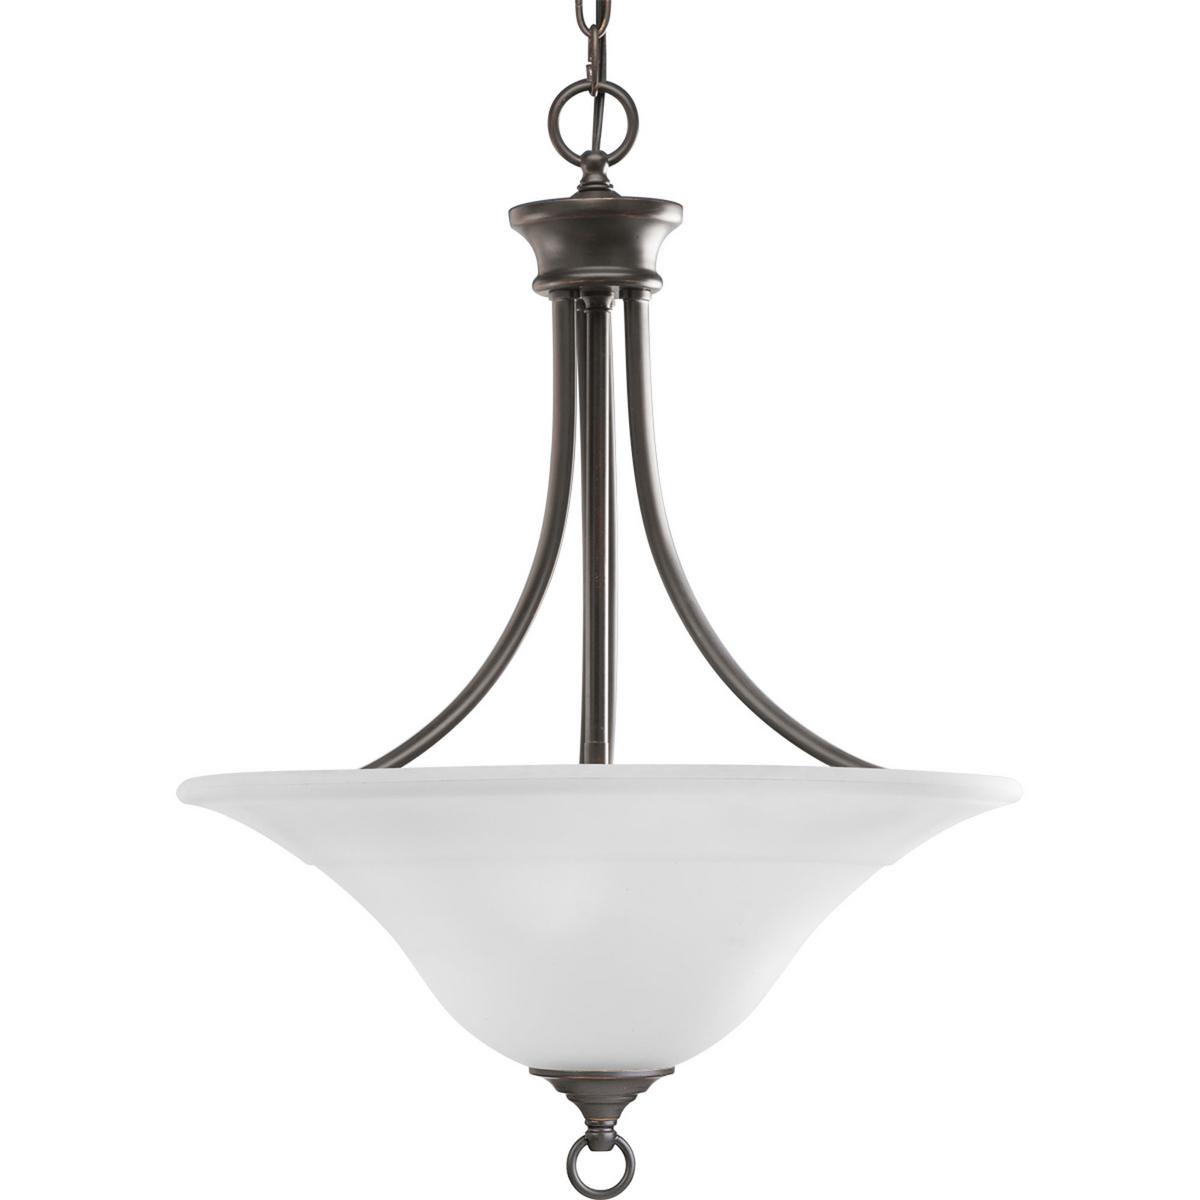 Hubbell P3474-20 Three-light hall and foyer fixture featuring soft angles, curving lines and etched glass shades. Gracefully exotic, the Trinity Collection offers classic sophistication for transitional interiors. Sculptural forms of metal and glass are enhanced by a clas